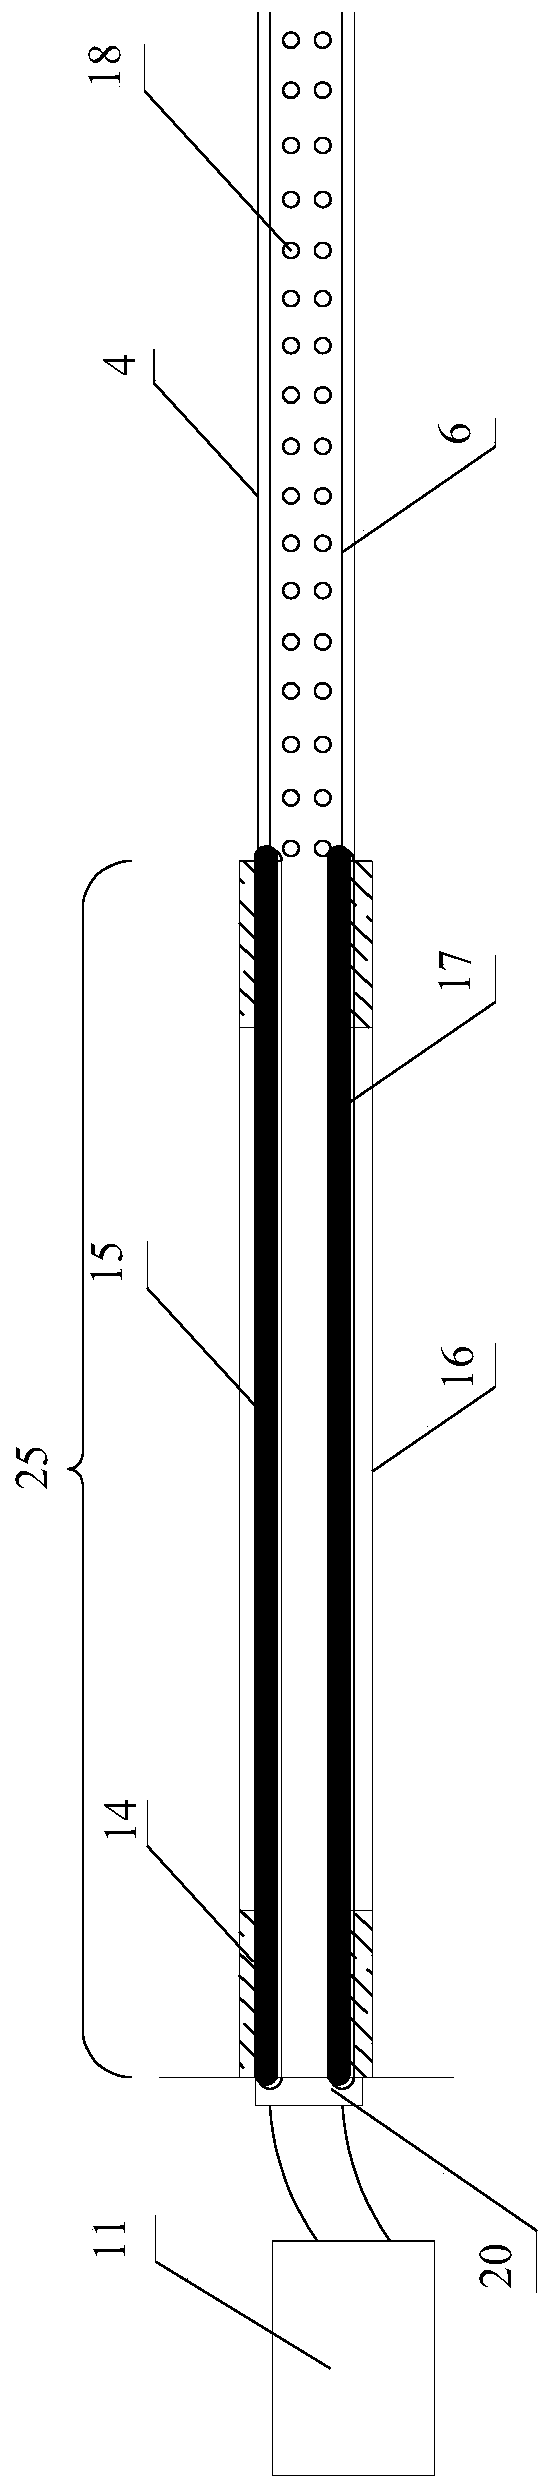 Method for reinforcing gas extraction through coal seam drilling jet fracturing and mining pressure cooperated effect